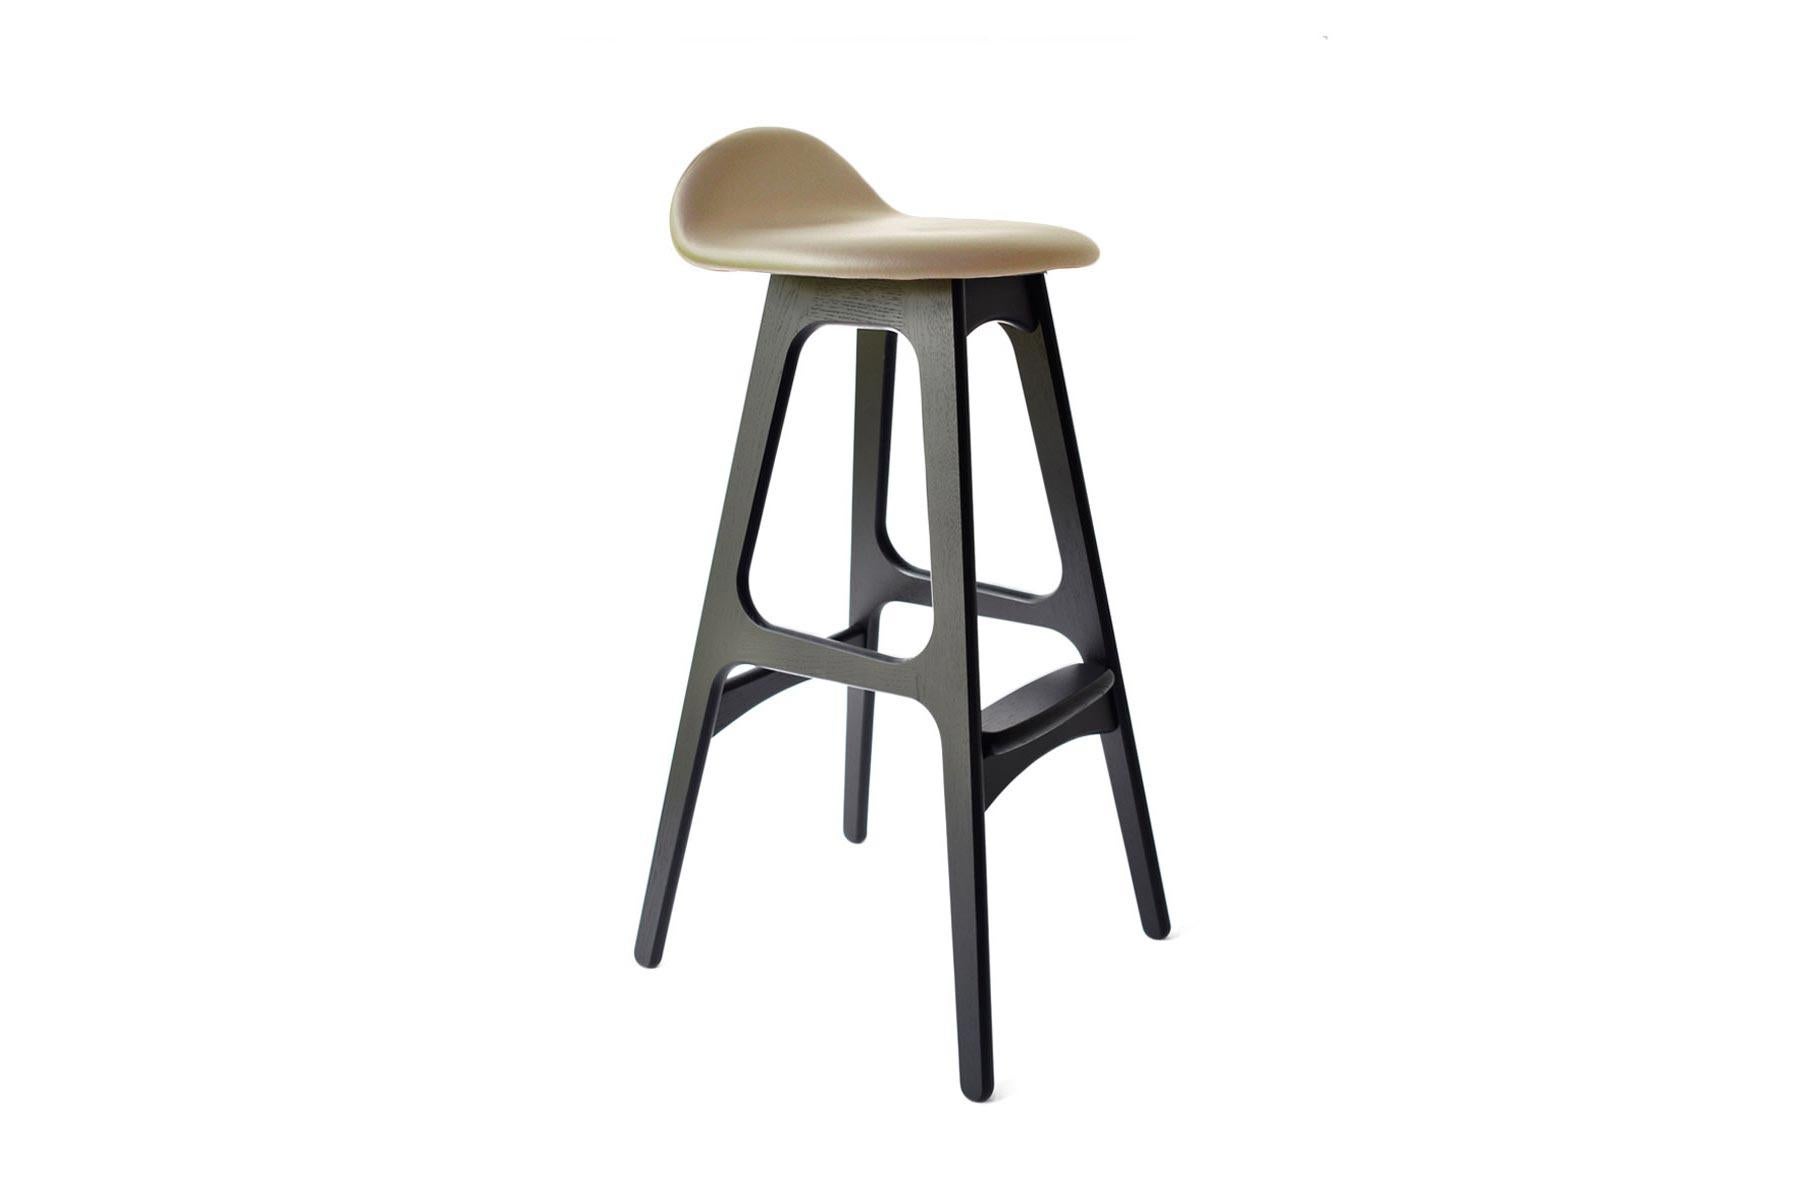 Originally produced in the 1960s, the Model 61 counter stool designed by Erik Buch is a beautiful example of Danish modern design. In production again for the first time, this instant classic is perfectly suited for any modern home or office, and